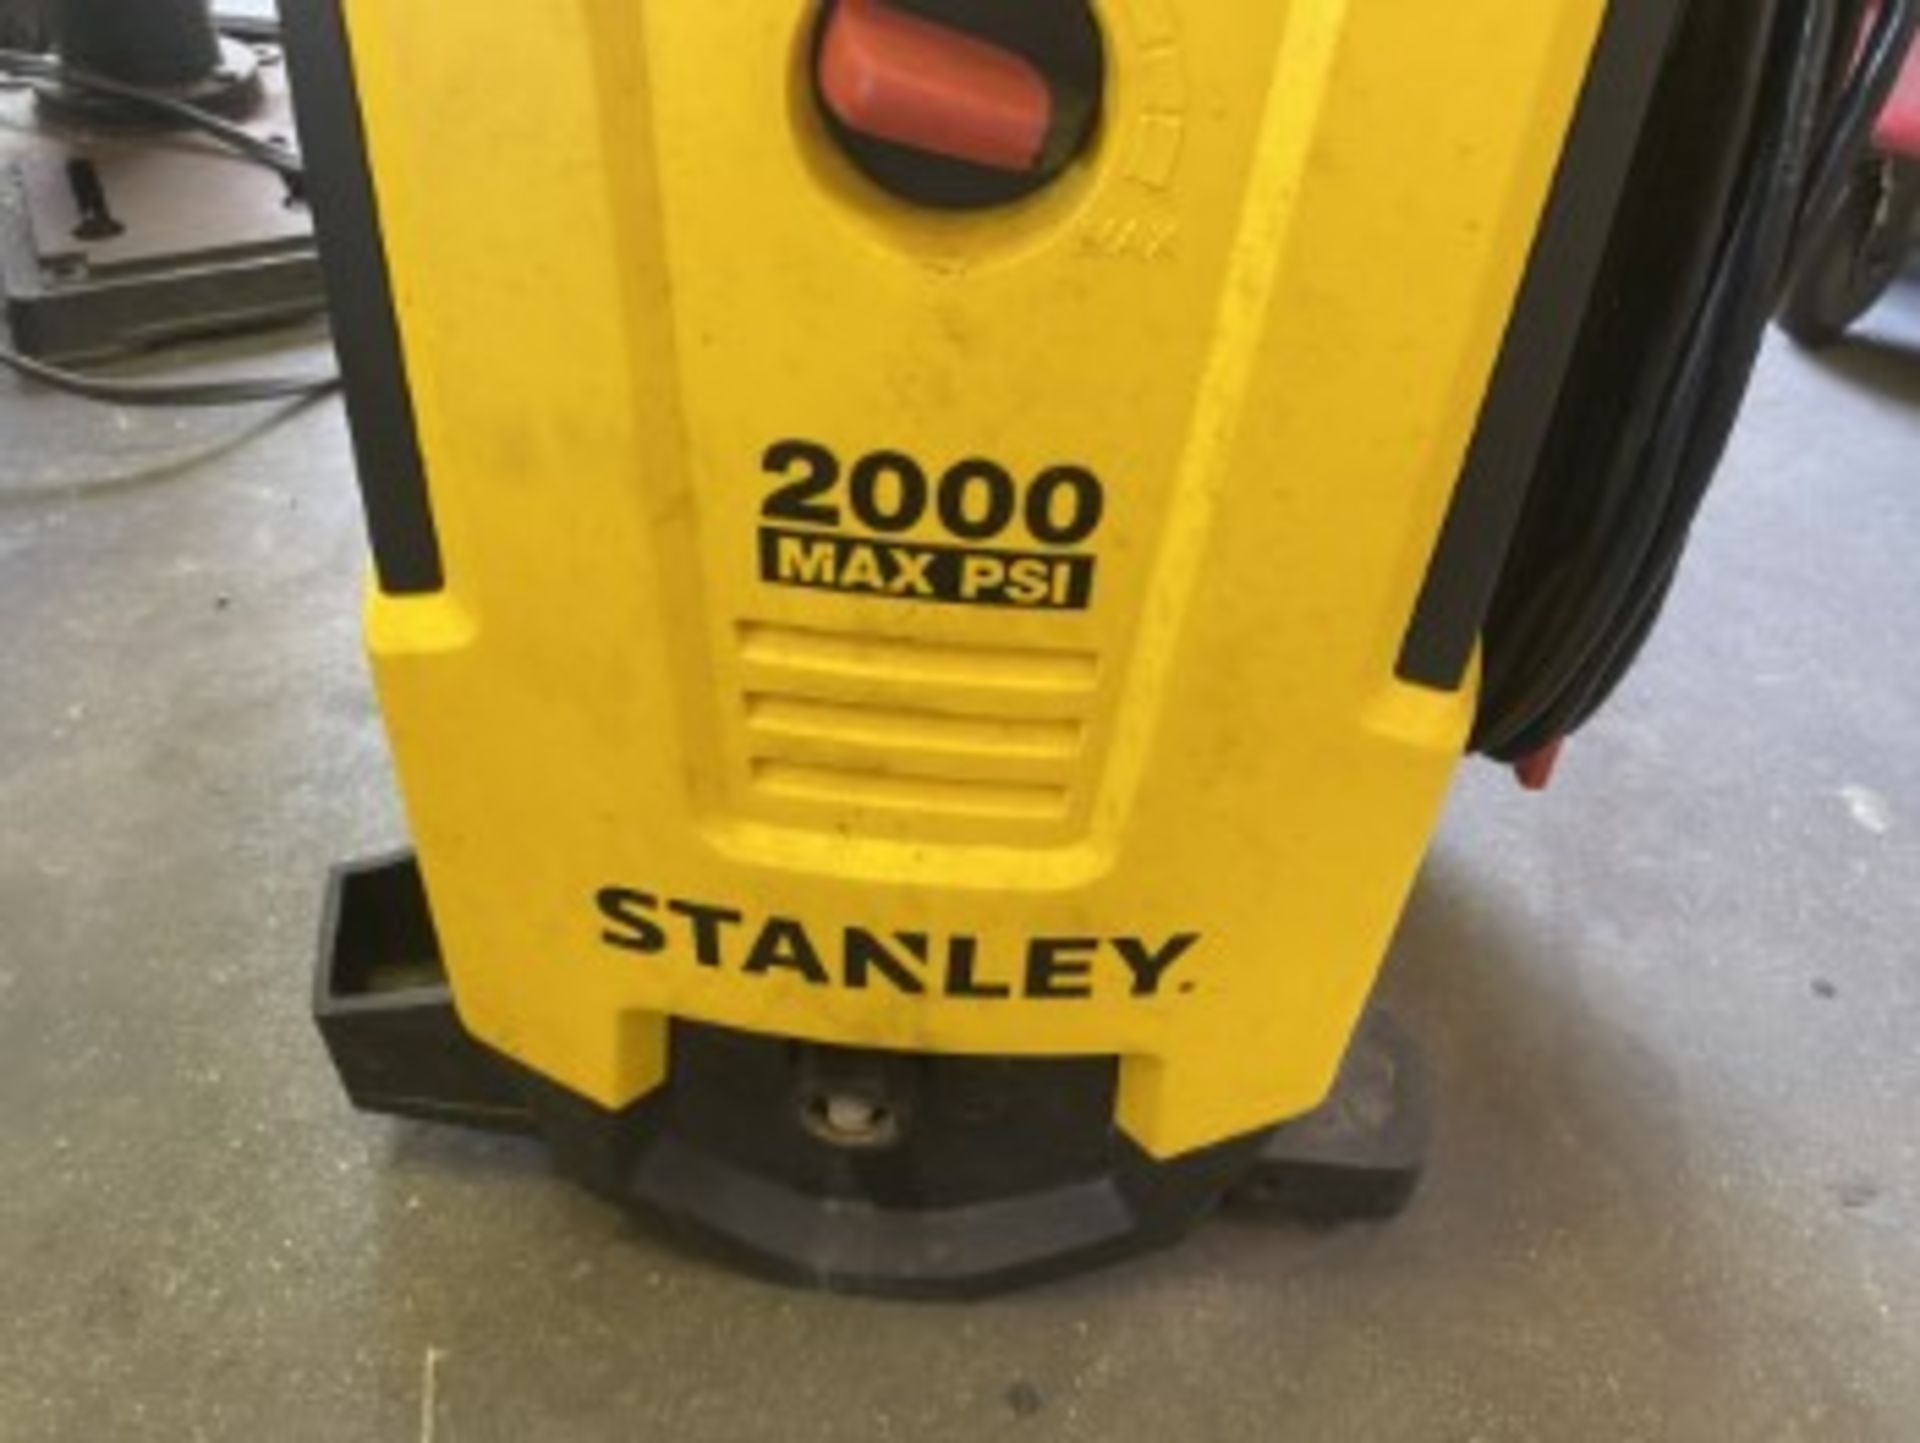 STANLEY ELECTRIC PRESSURE WASHER - 200 MAX PSI - Image 2 of 4